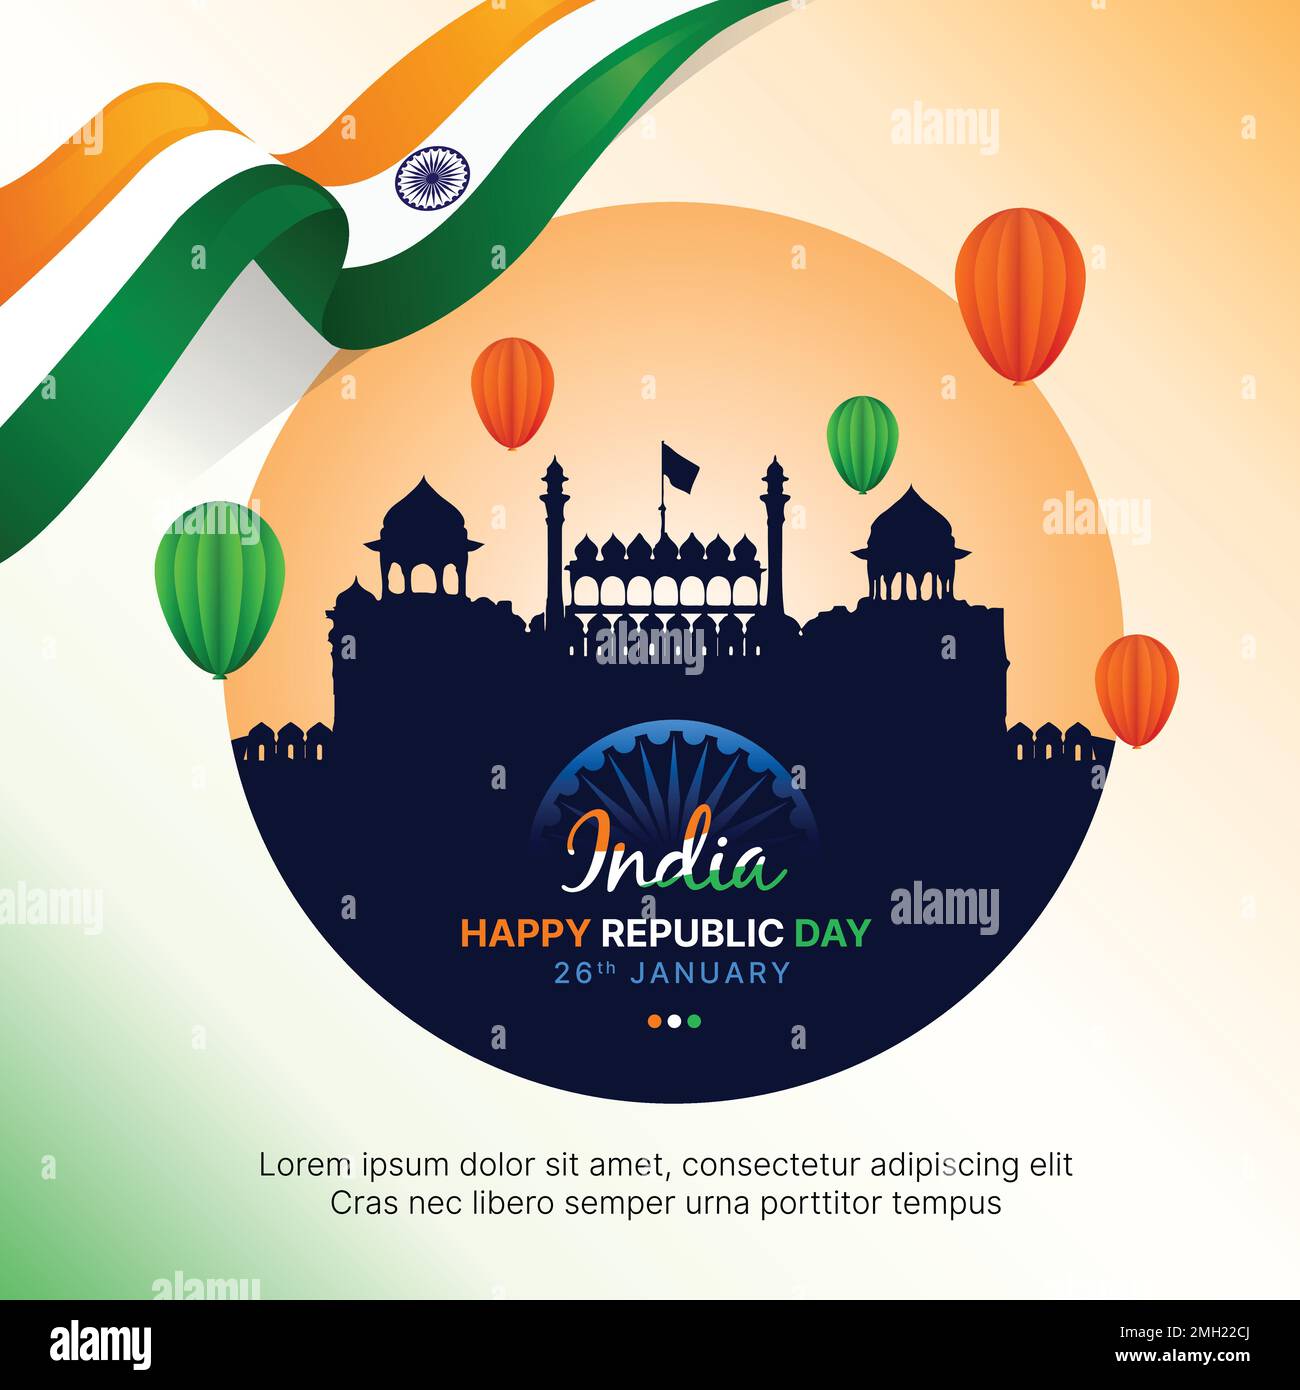 Stock Illustration of 15th August Happy Independence Day of India, tricolor paint brush stroke, flying hot air balloon and famous monuments of India. Stock Vector